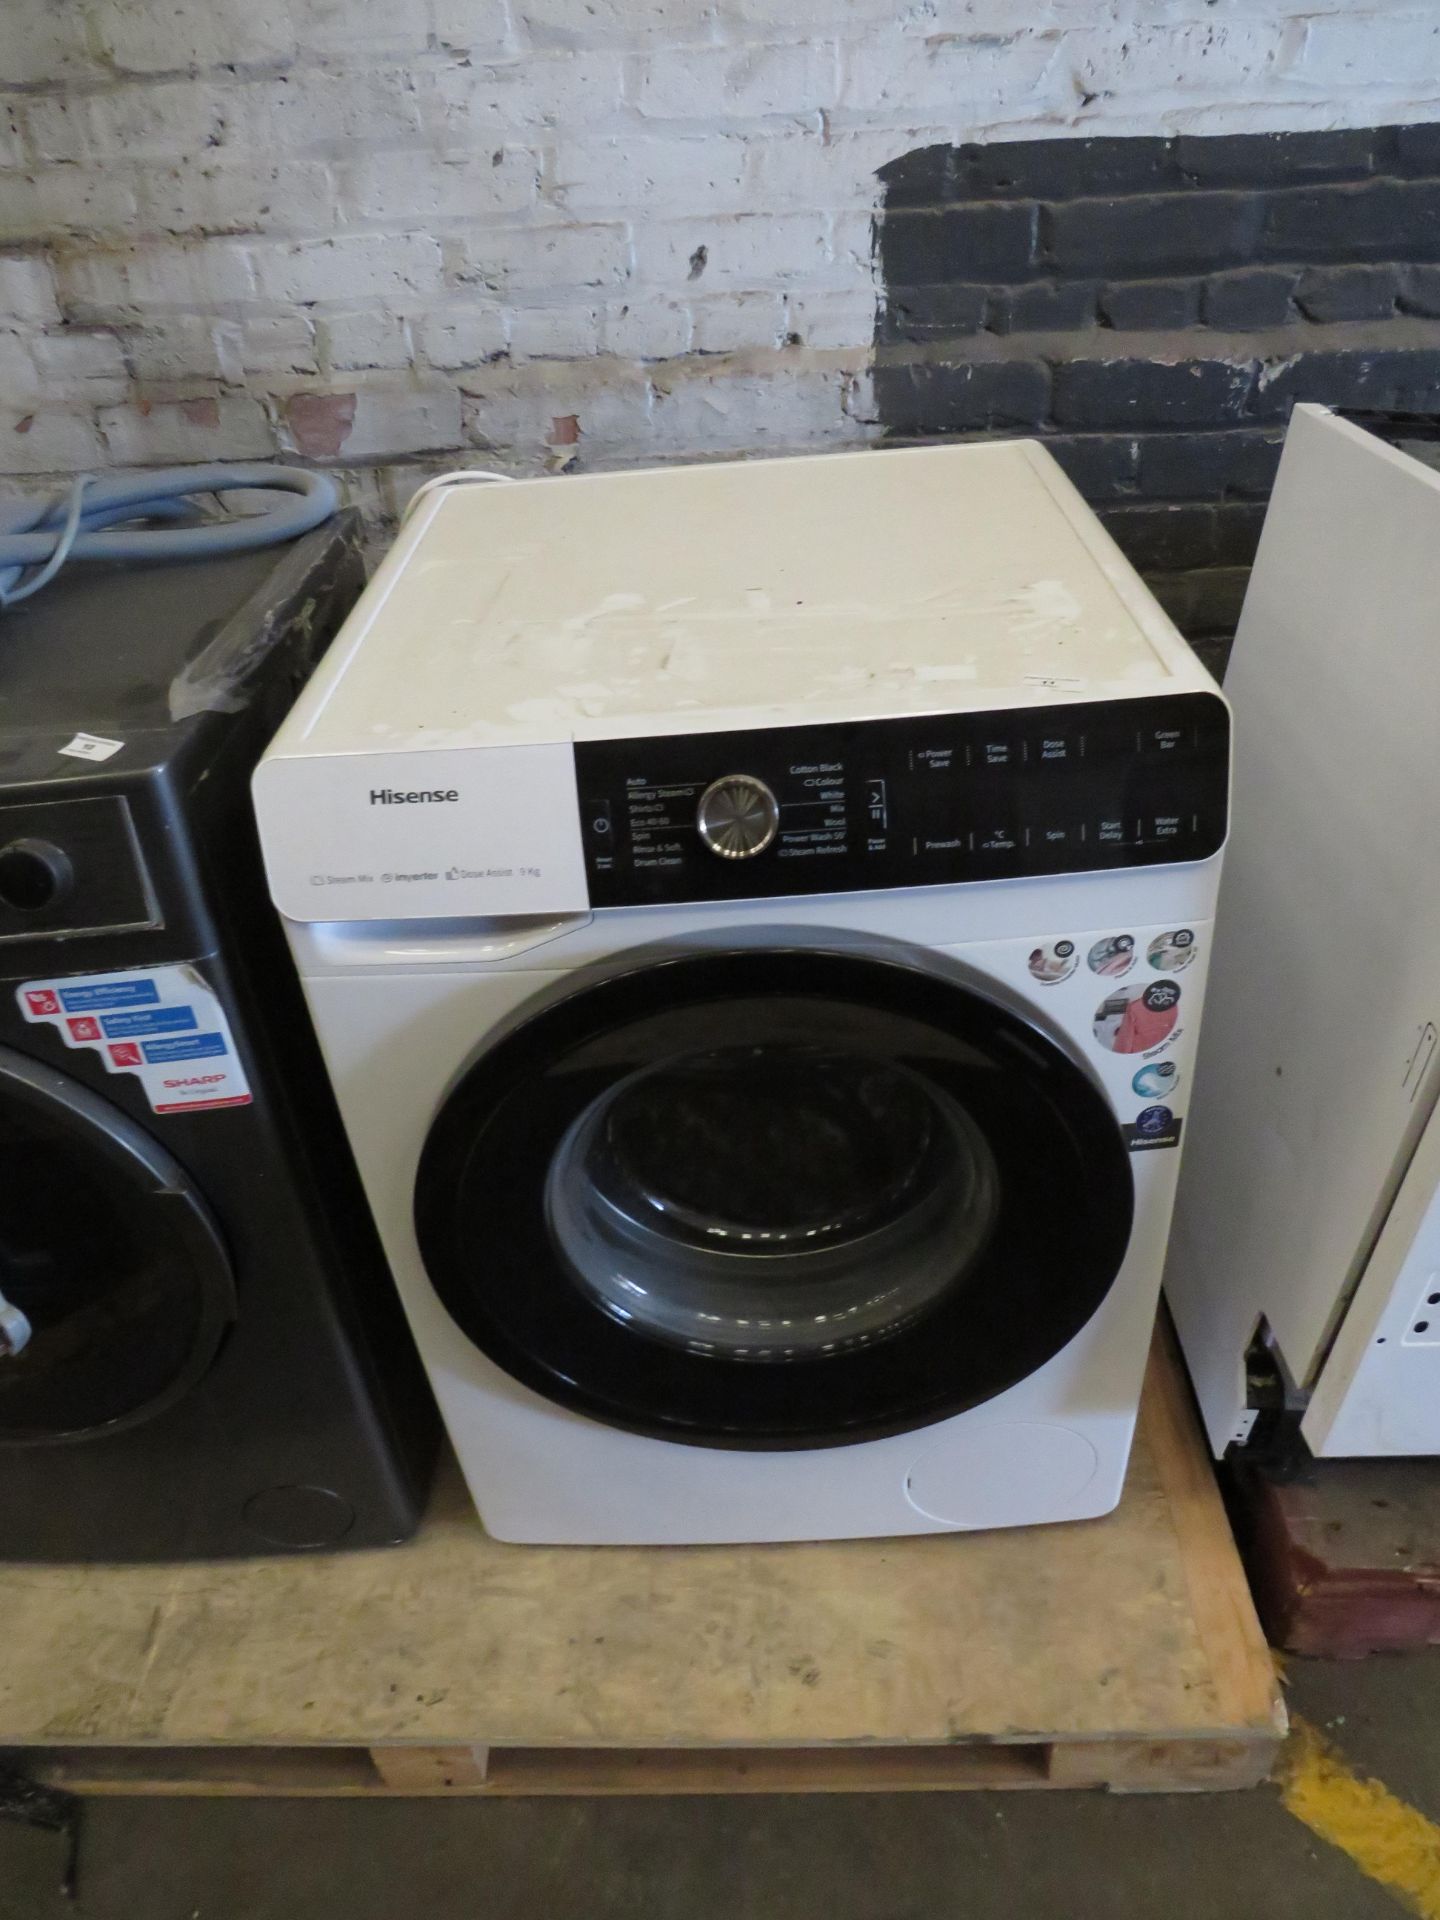 Hisense 9KG washing machine with dose assist, powers on and the drum spins but we have not connected